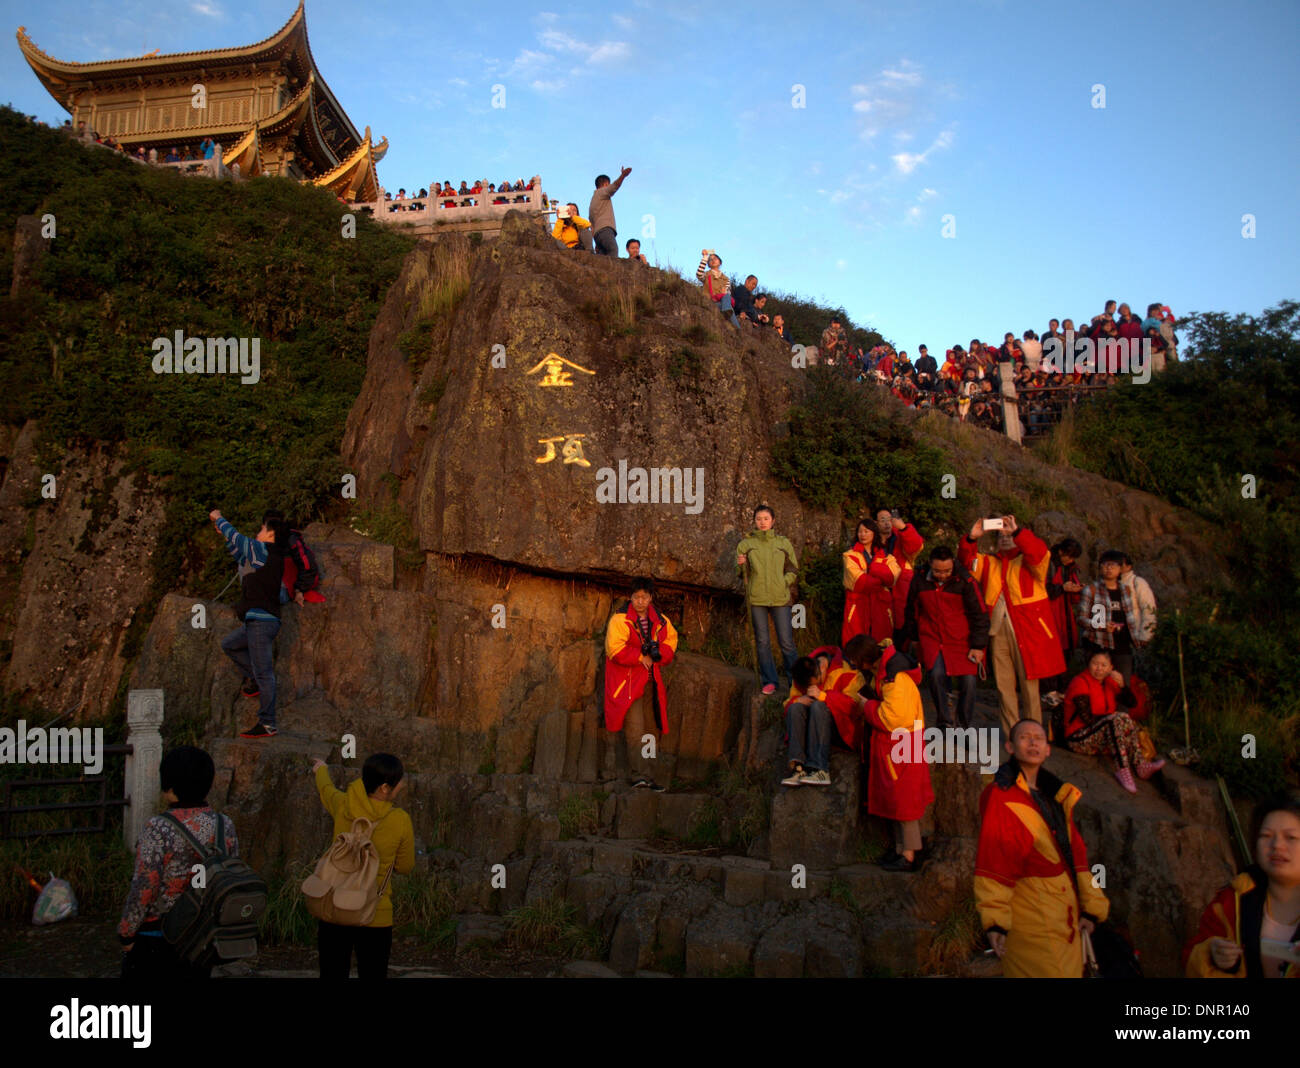 Sunrise dawn temples at the Golden summit of Mount Emei, Emei Shan, near Leshan, Sichuan province, China. Stock Photo